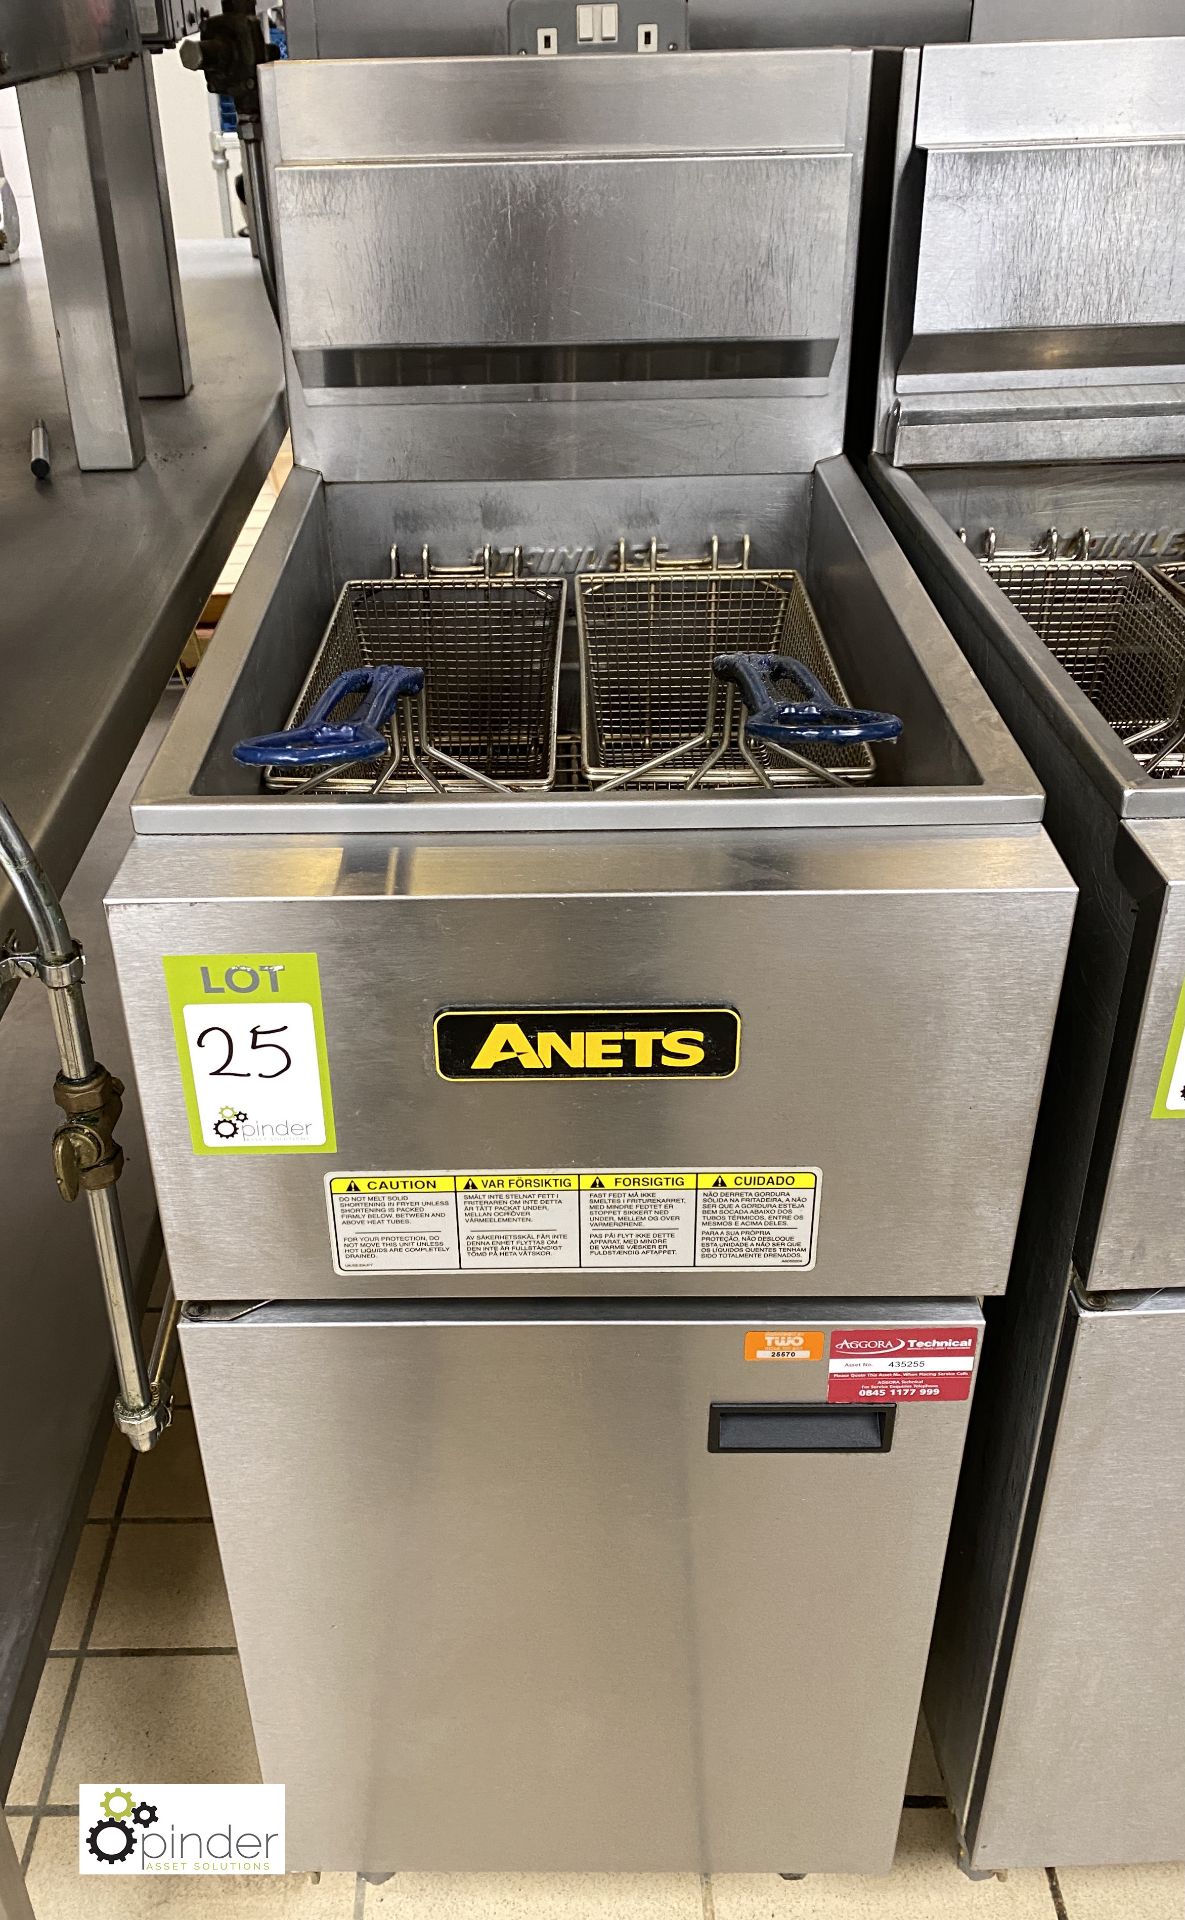 Anets SLG50 stainless steel gas fired twin basket Deep Fat Fryer